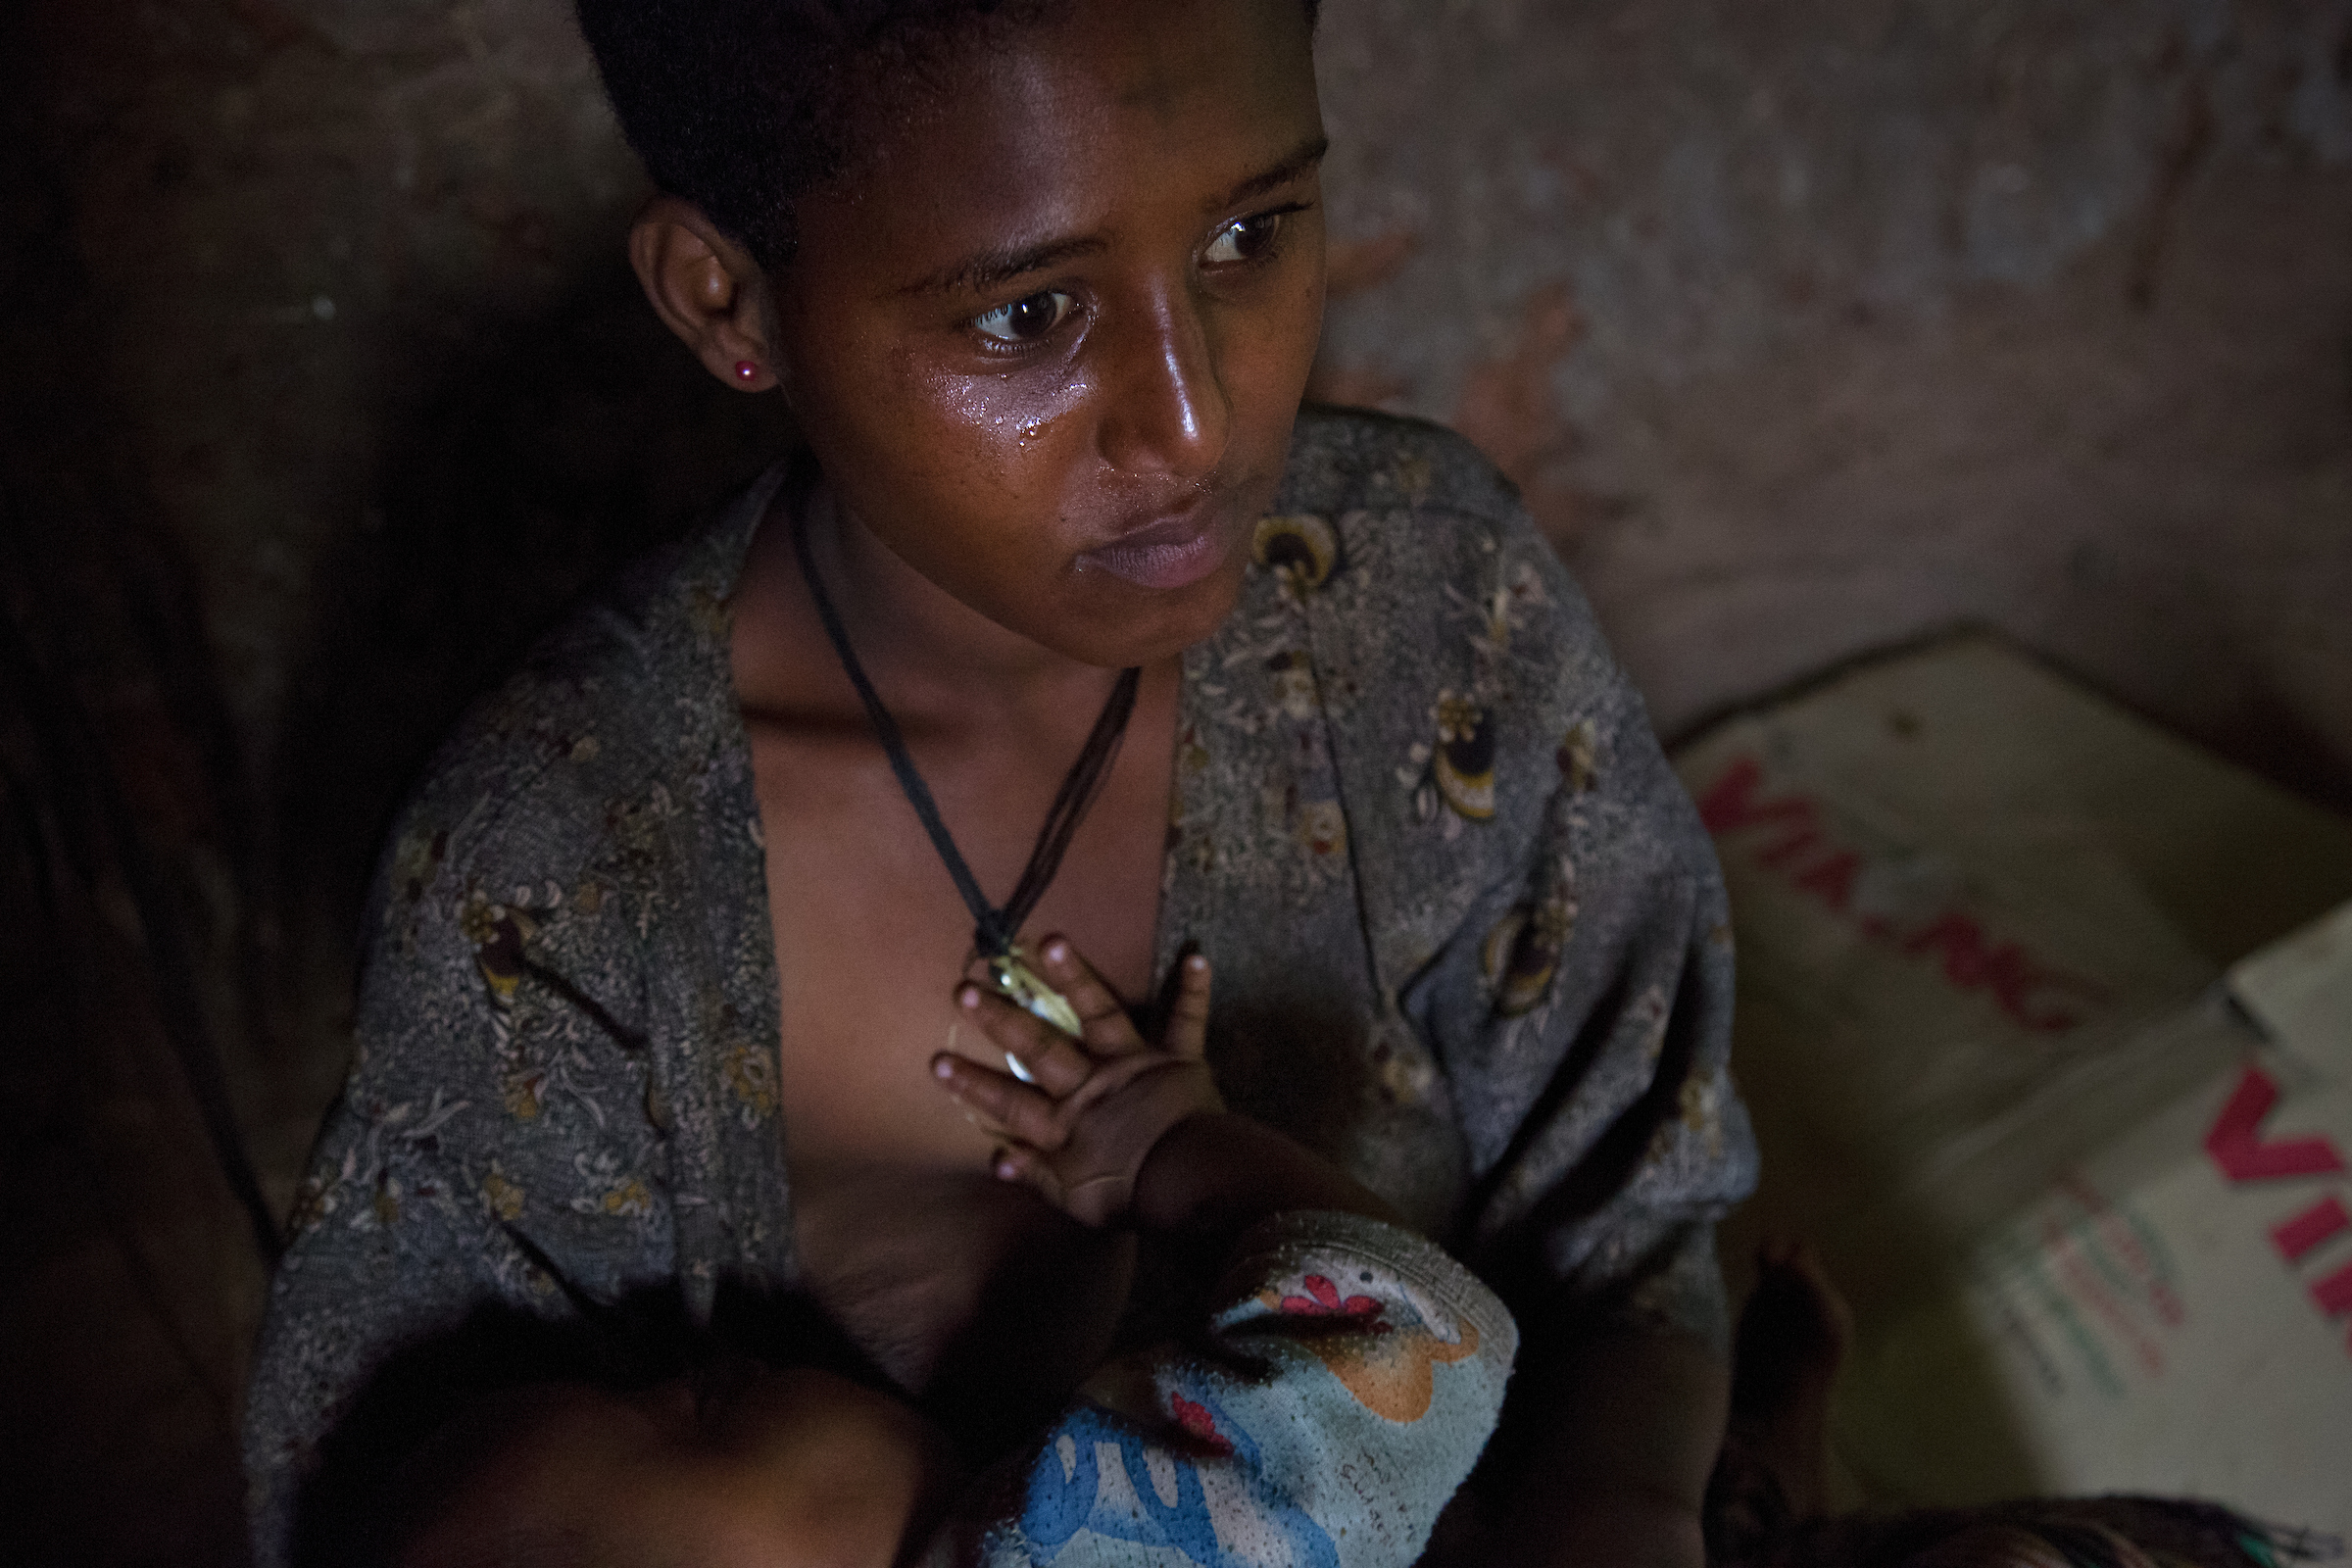 Fifteen-year- old Destaye breastfeeds her son inside her home. Girls married at such young ages rarely have any say in family planning.